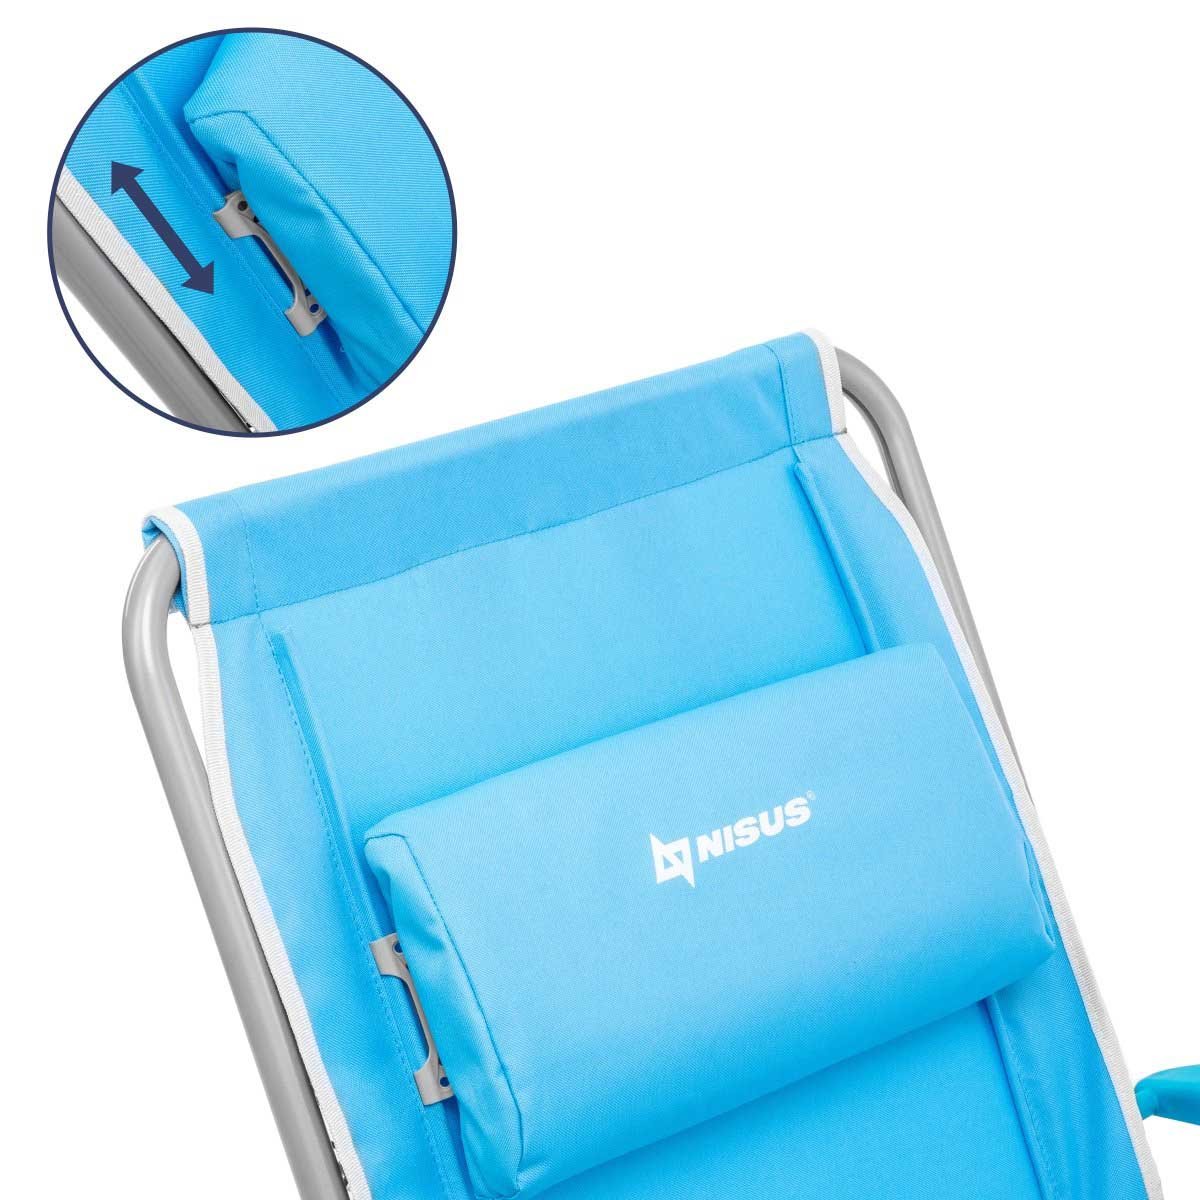 Premium Backpack Beach Chair's Headrest is movable up and down